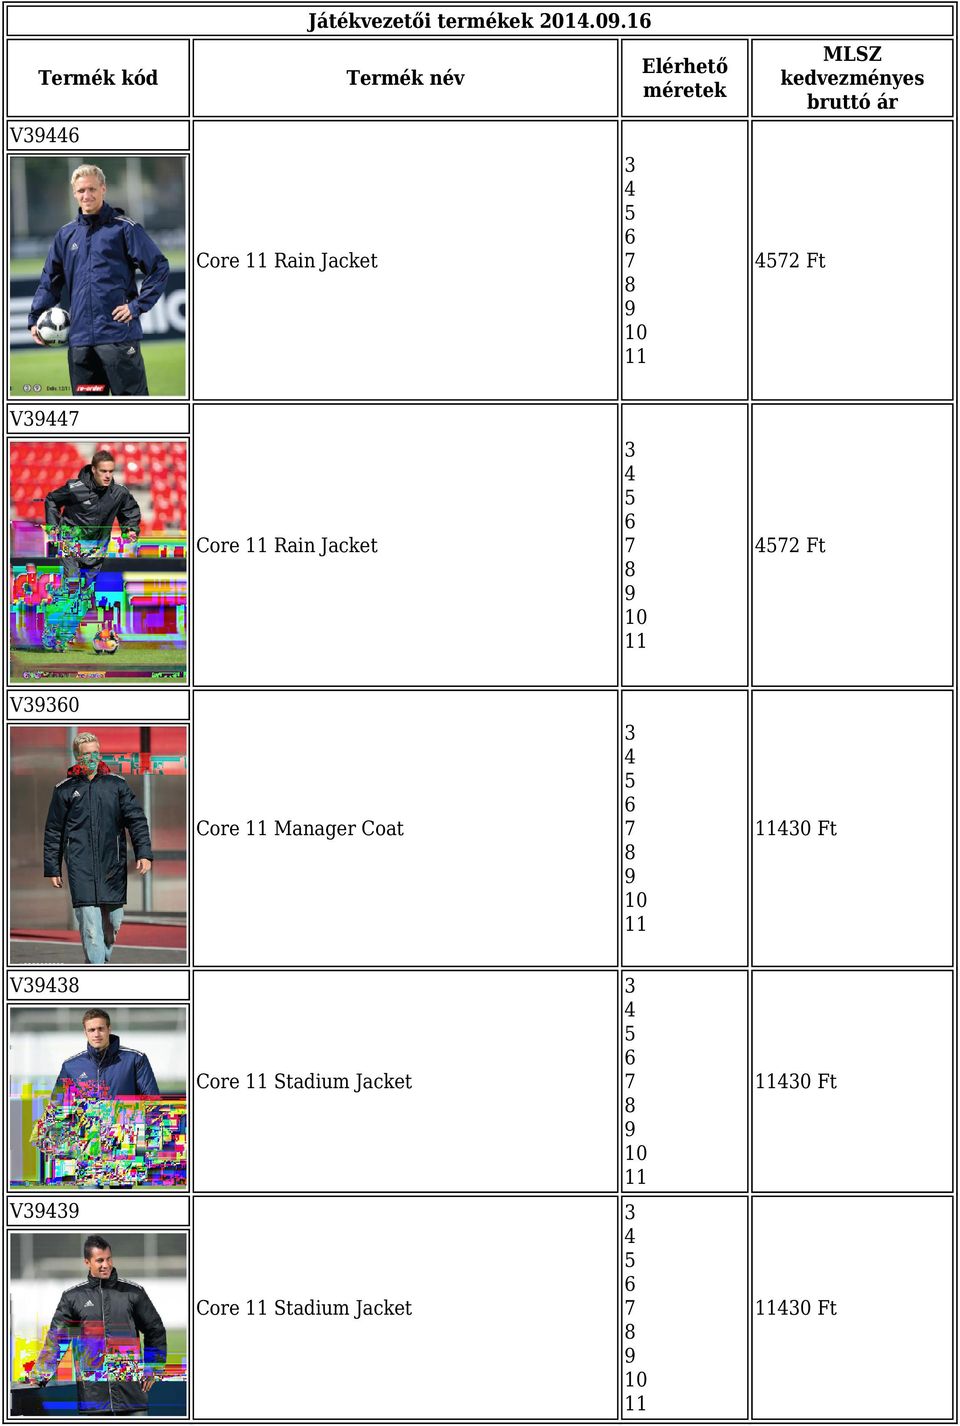 Jacket Core anager Coat 0 Ft Core